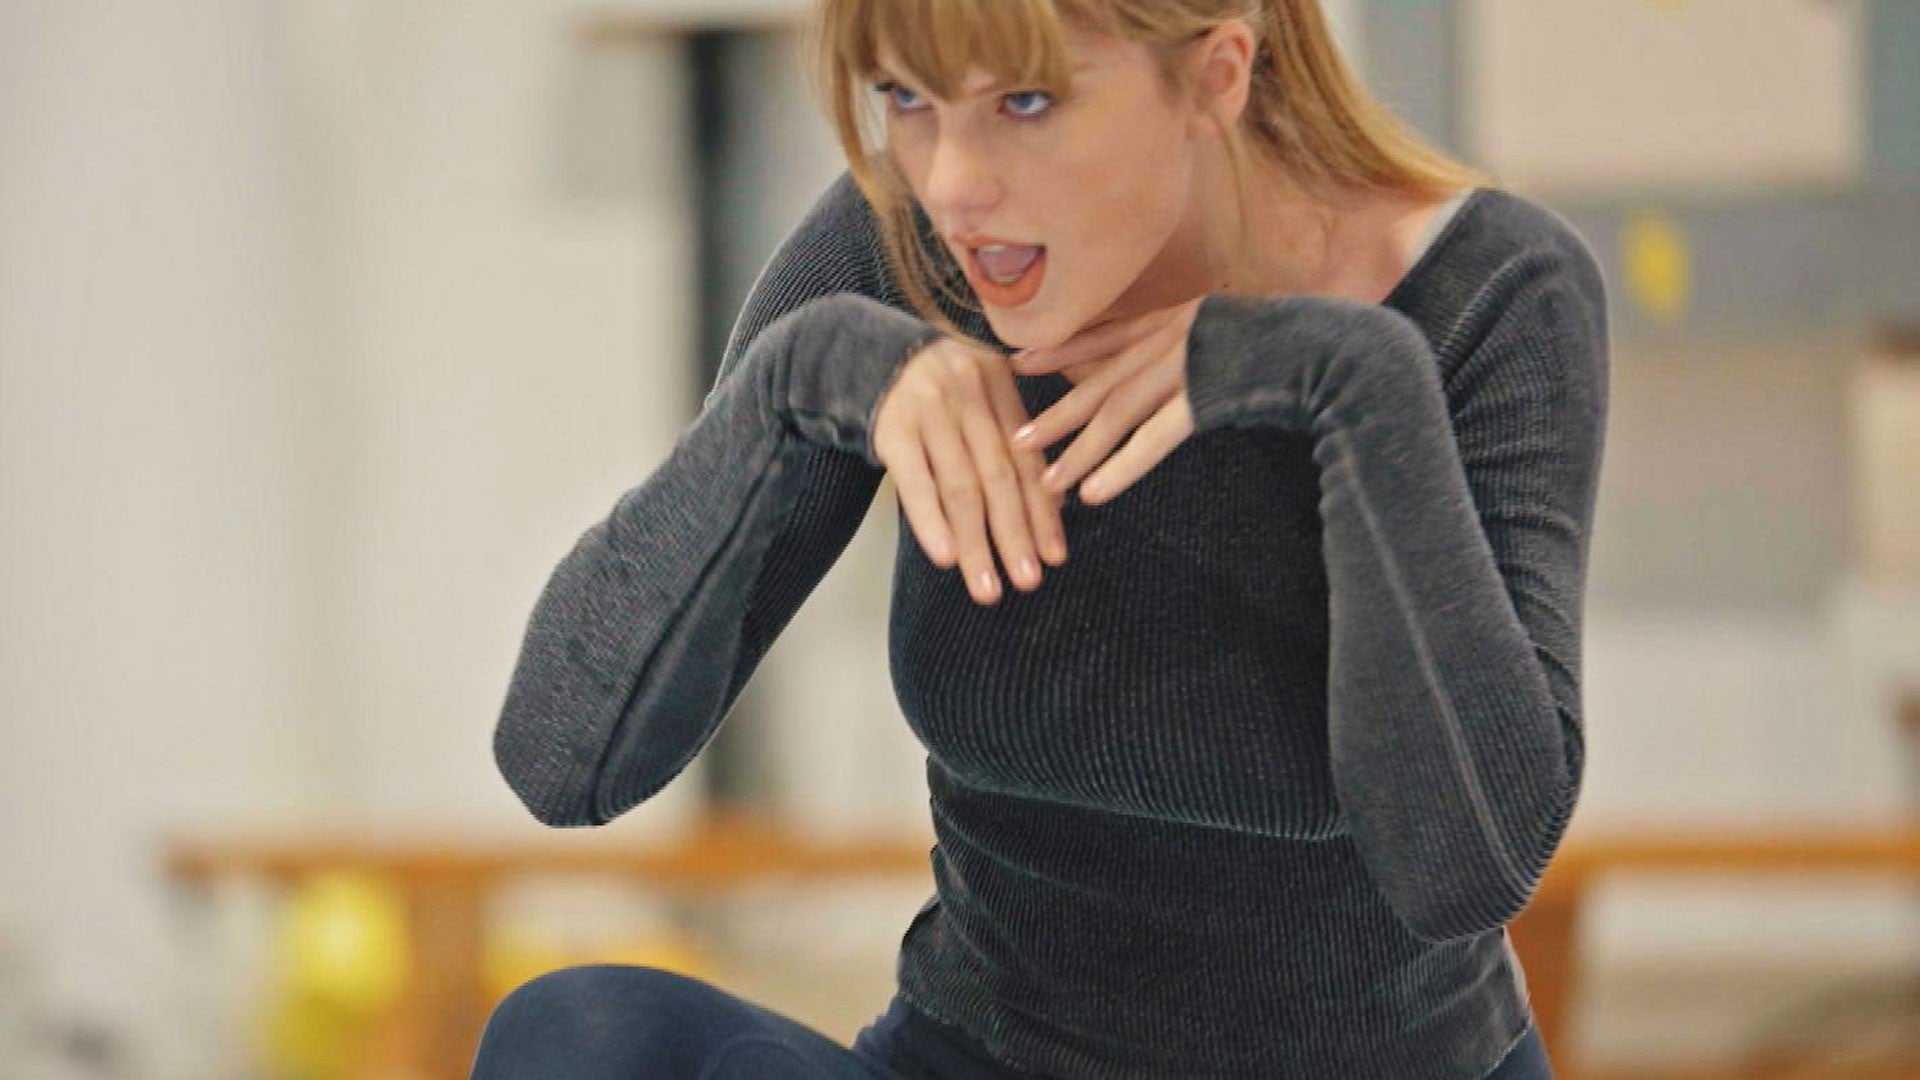 Taylor Swift Shows Off Her Dance Moves In New Cats Teaser